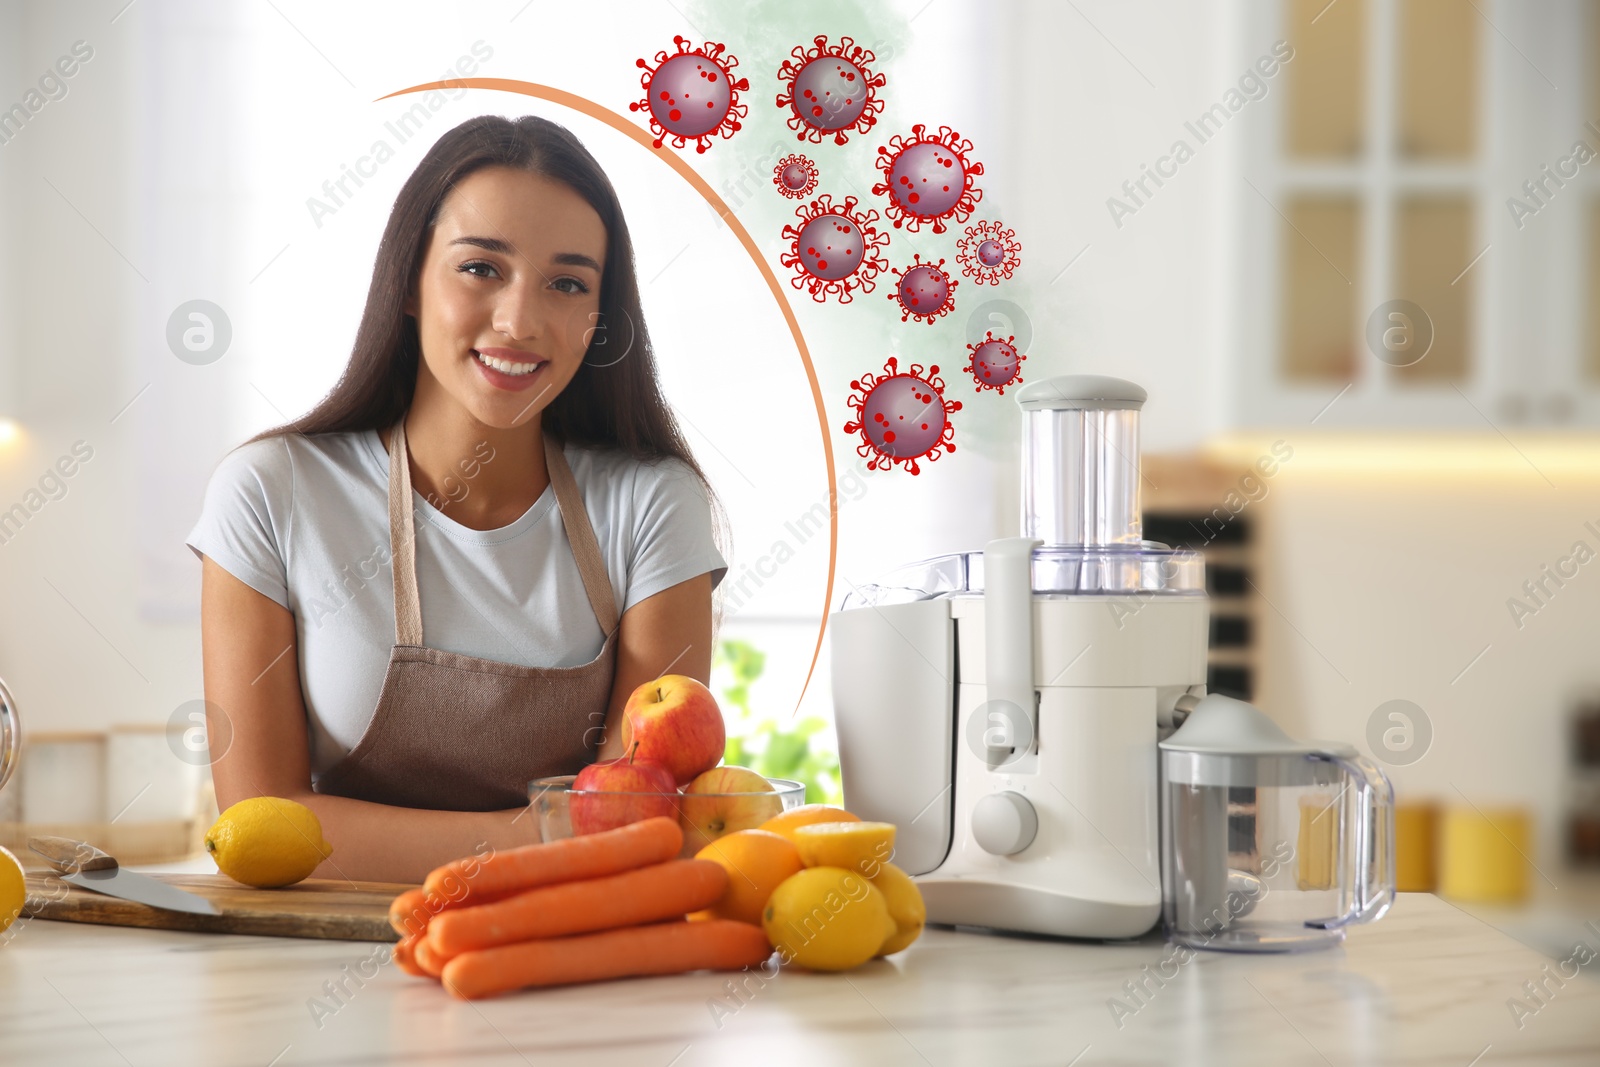 Image of Happy woman and ingredients for immunity boosting cocktail in kitchen. Protection against viruses